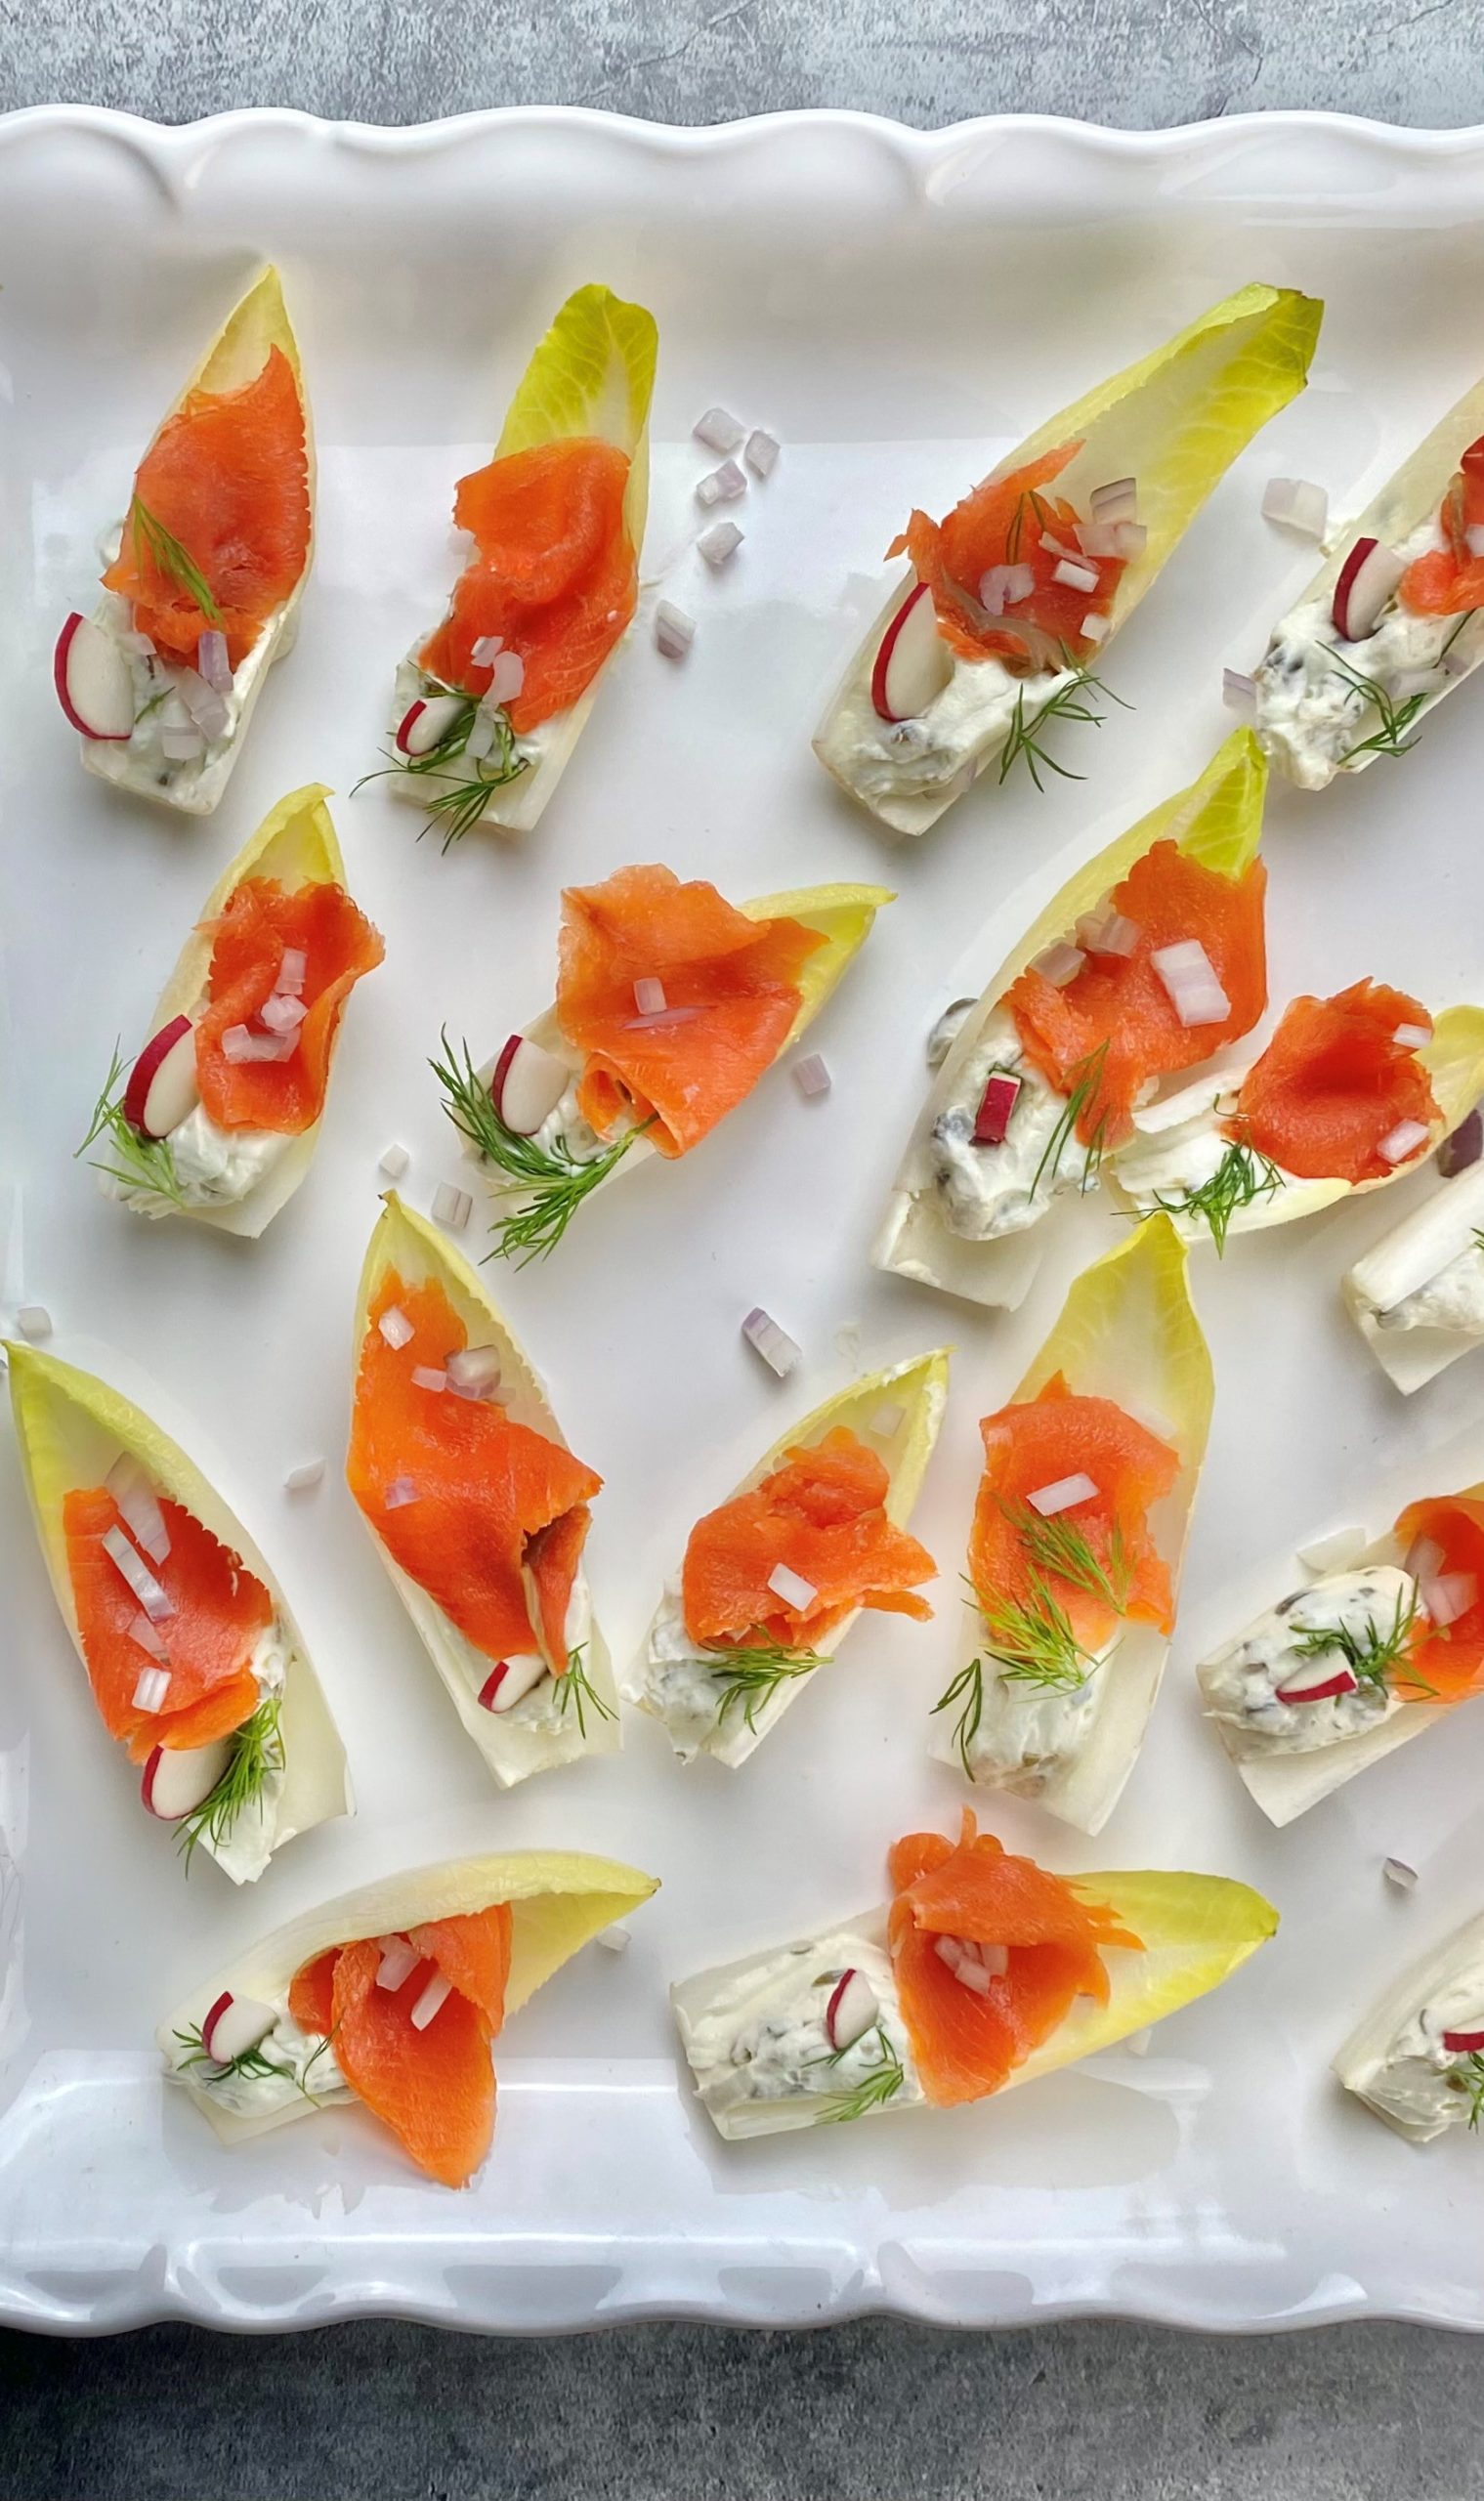 Smoked Salmon in Endive Boats